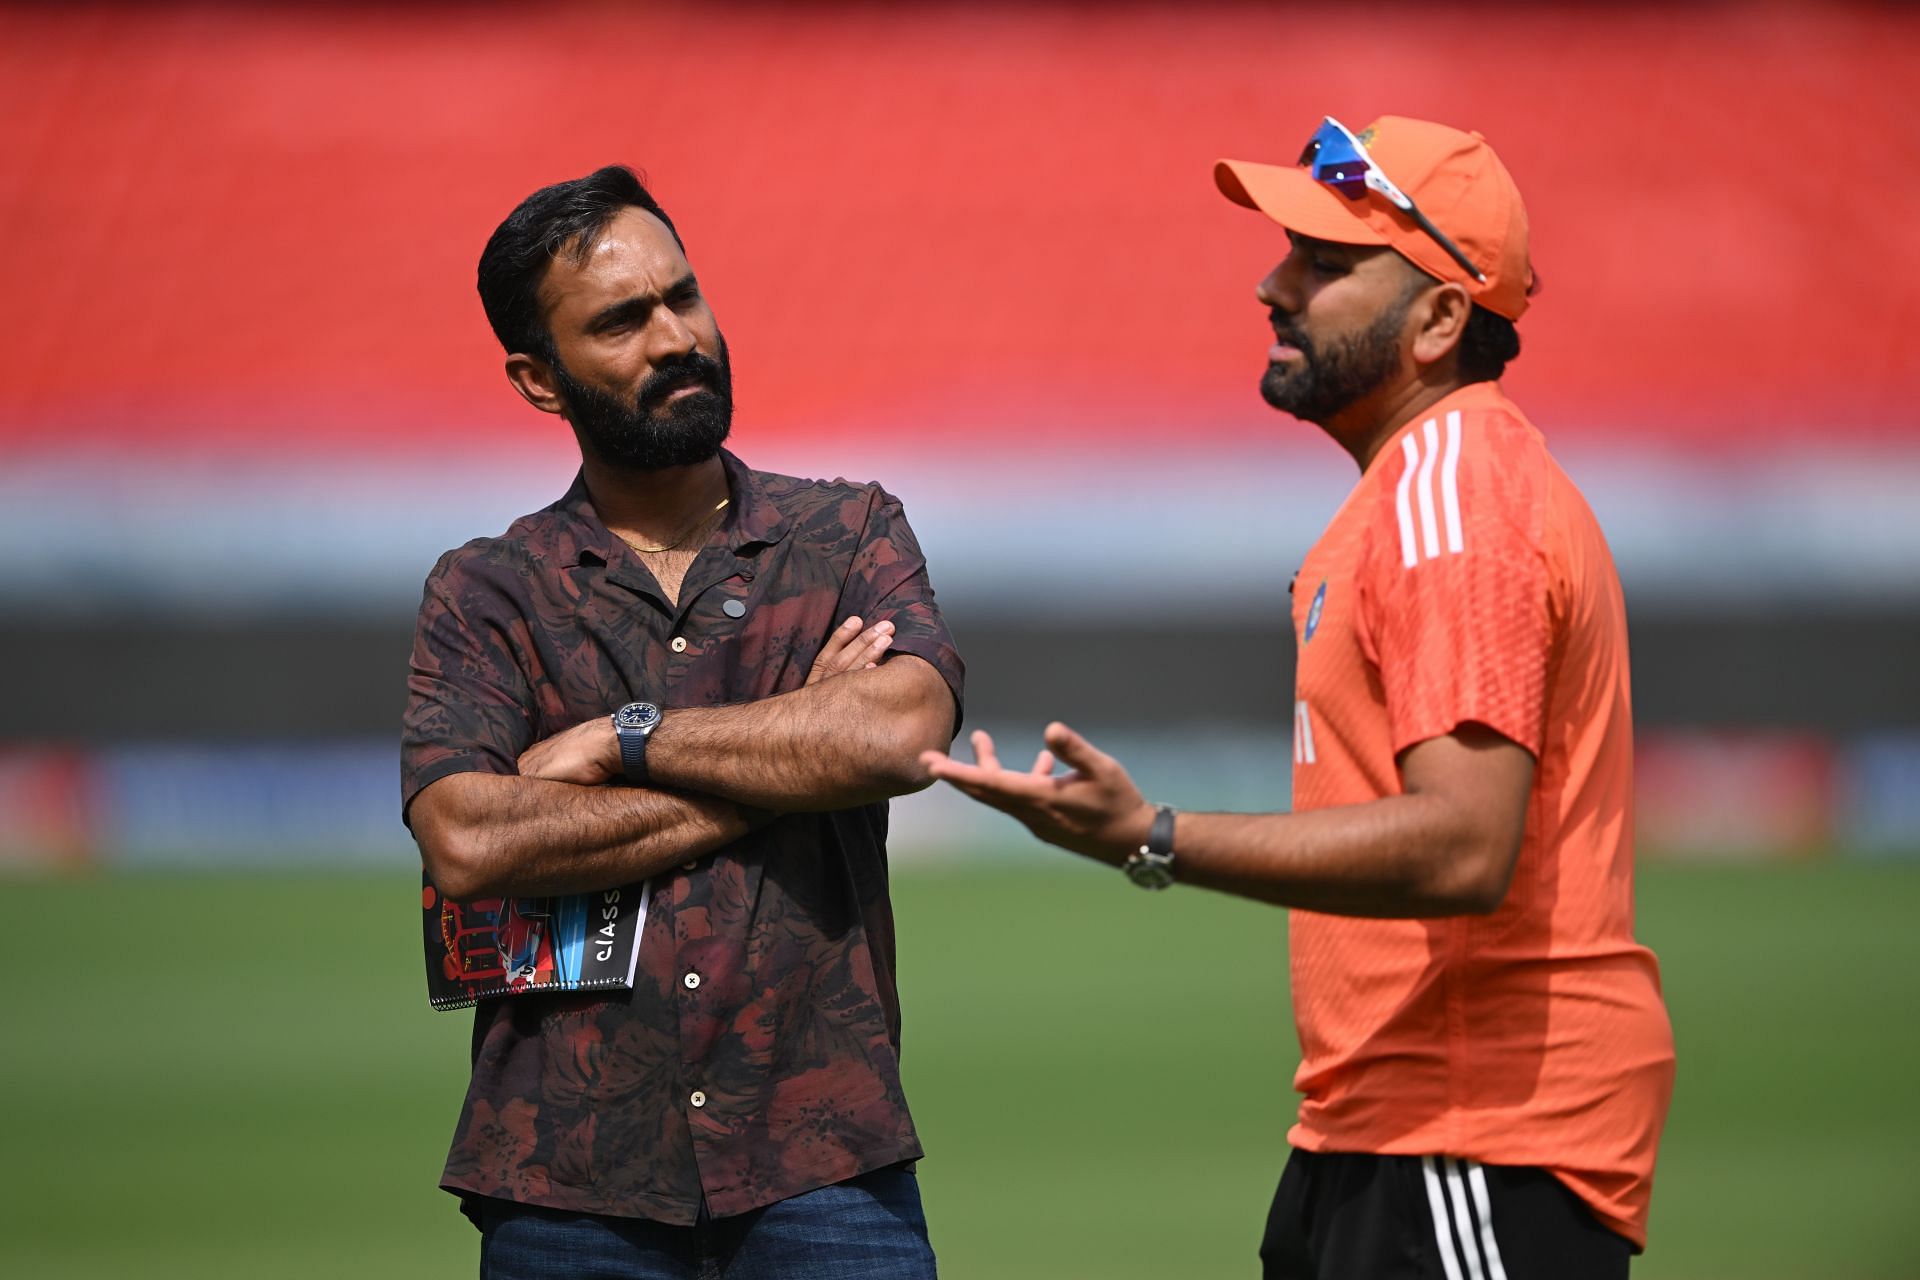 Karthik chatting with Indian skipper Rohit Sharma ahead of the first Test.